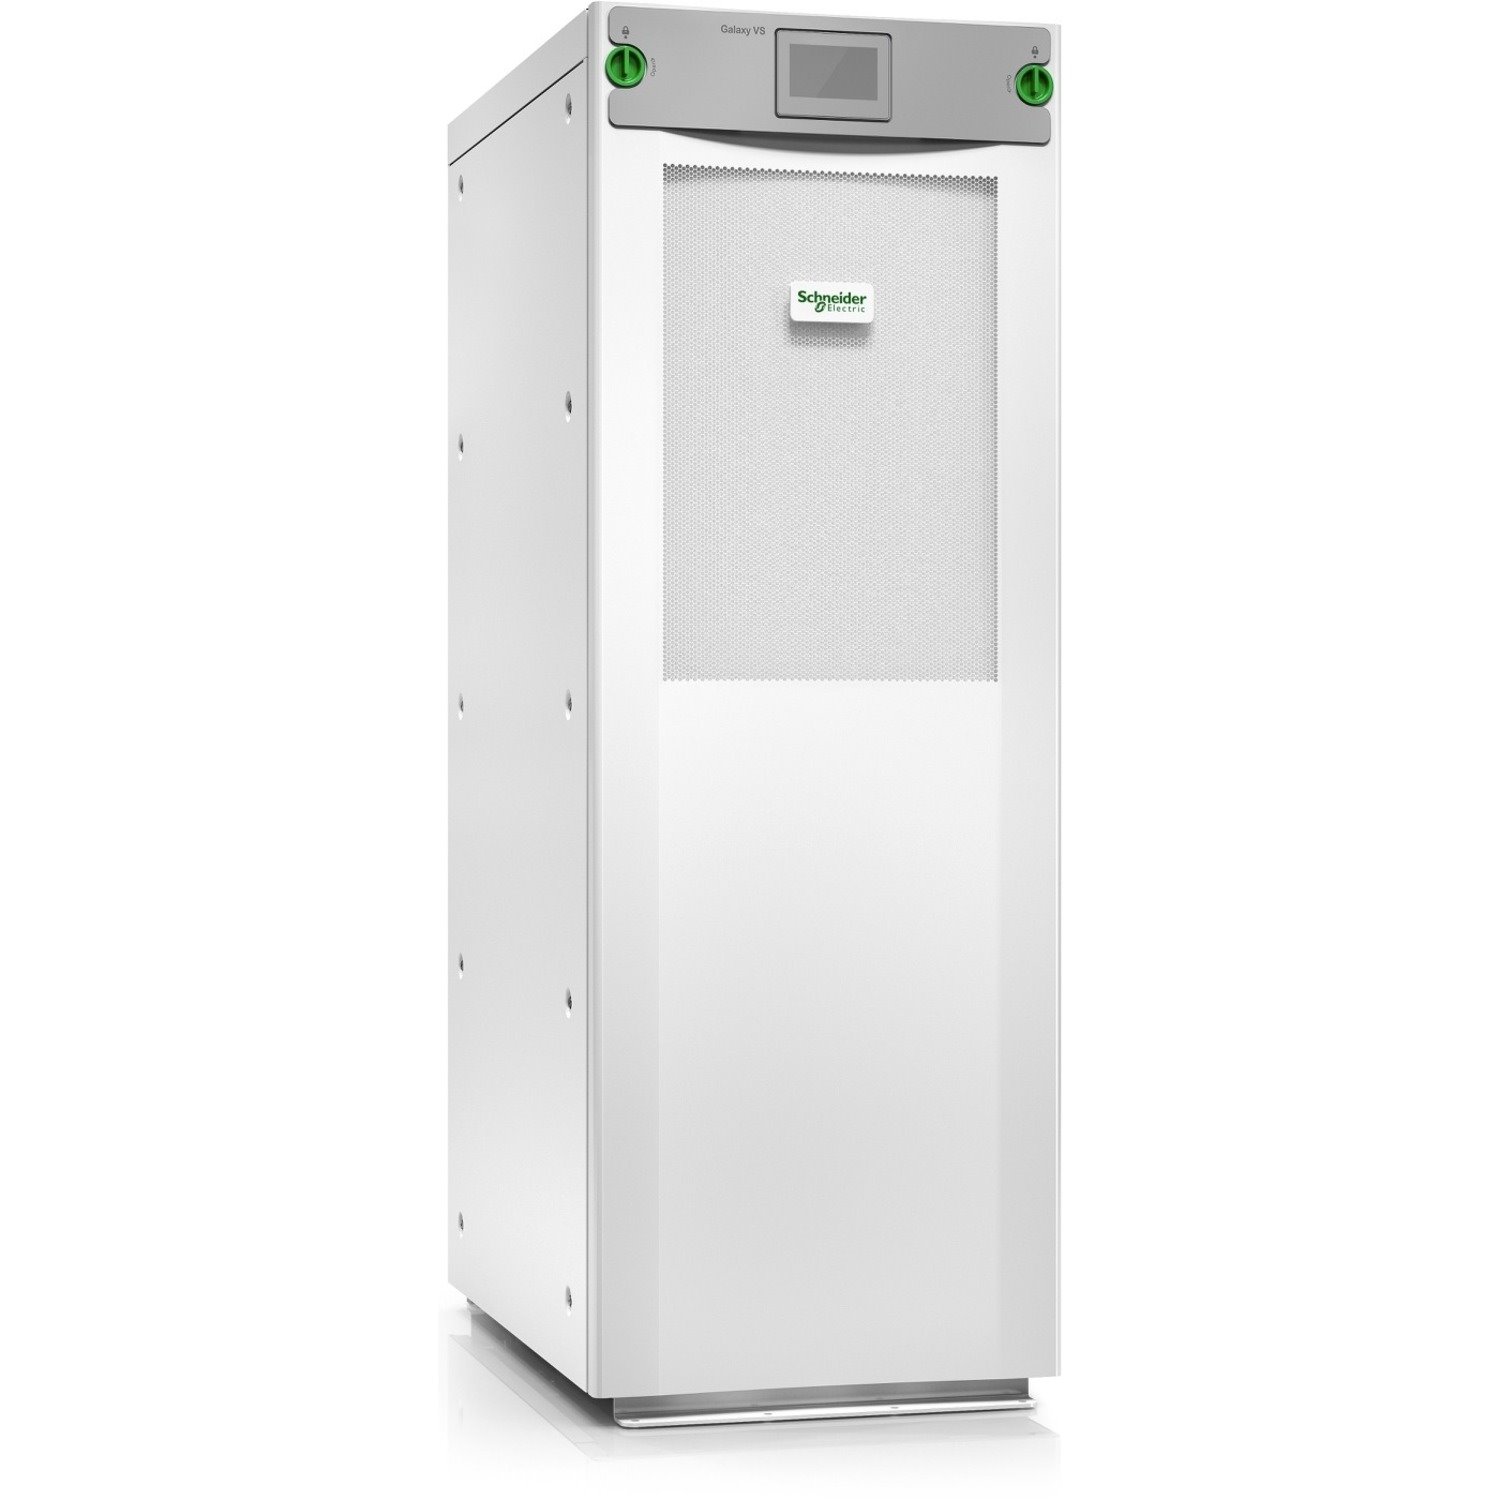 APC by Schneider Electric Galaxy VS Double Conversion Online UPS - 20 kVA - Three Phase